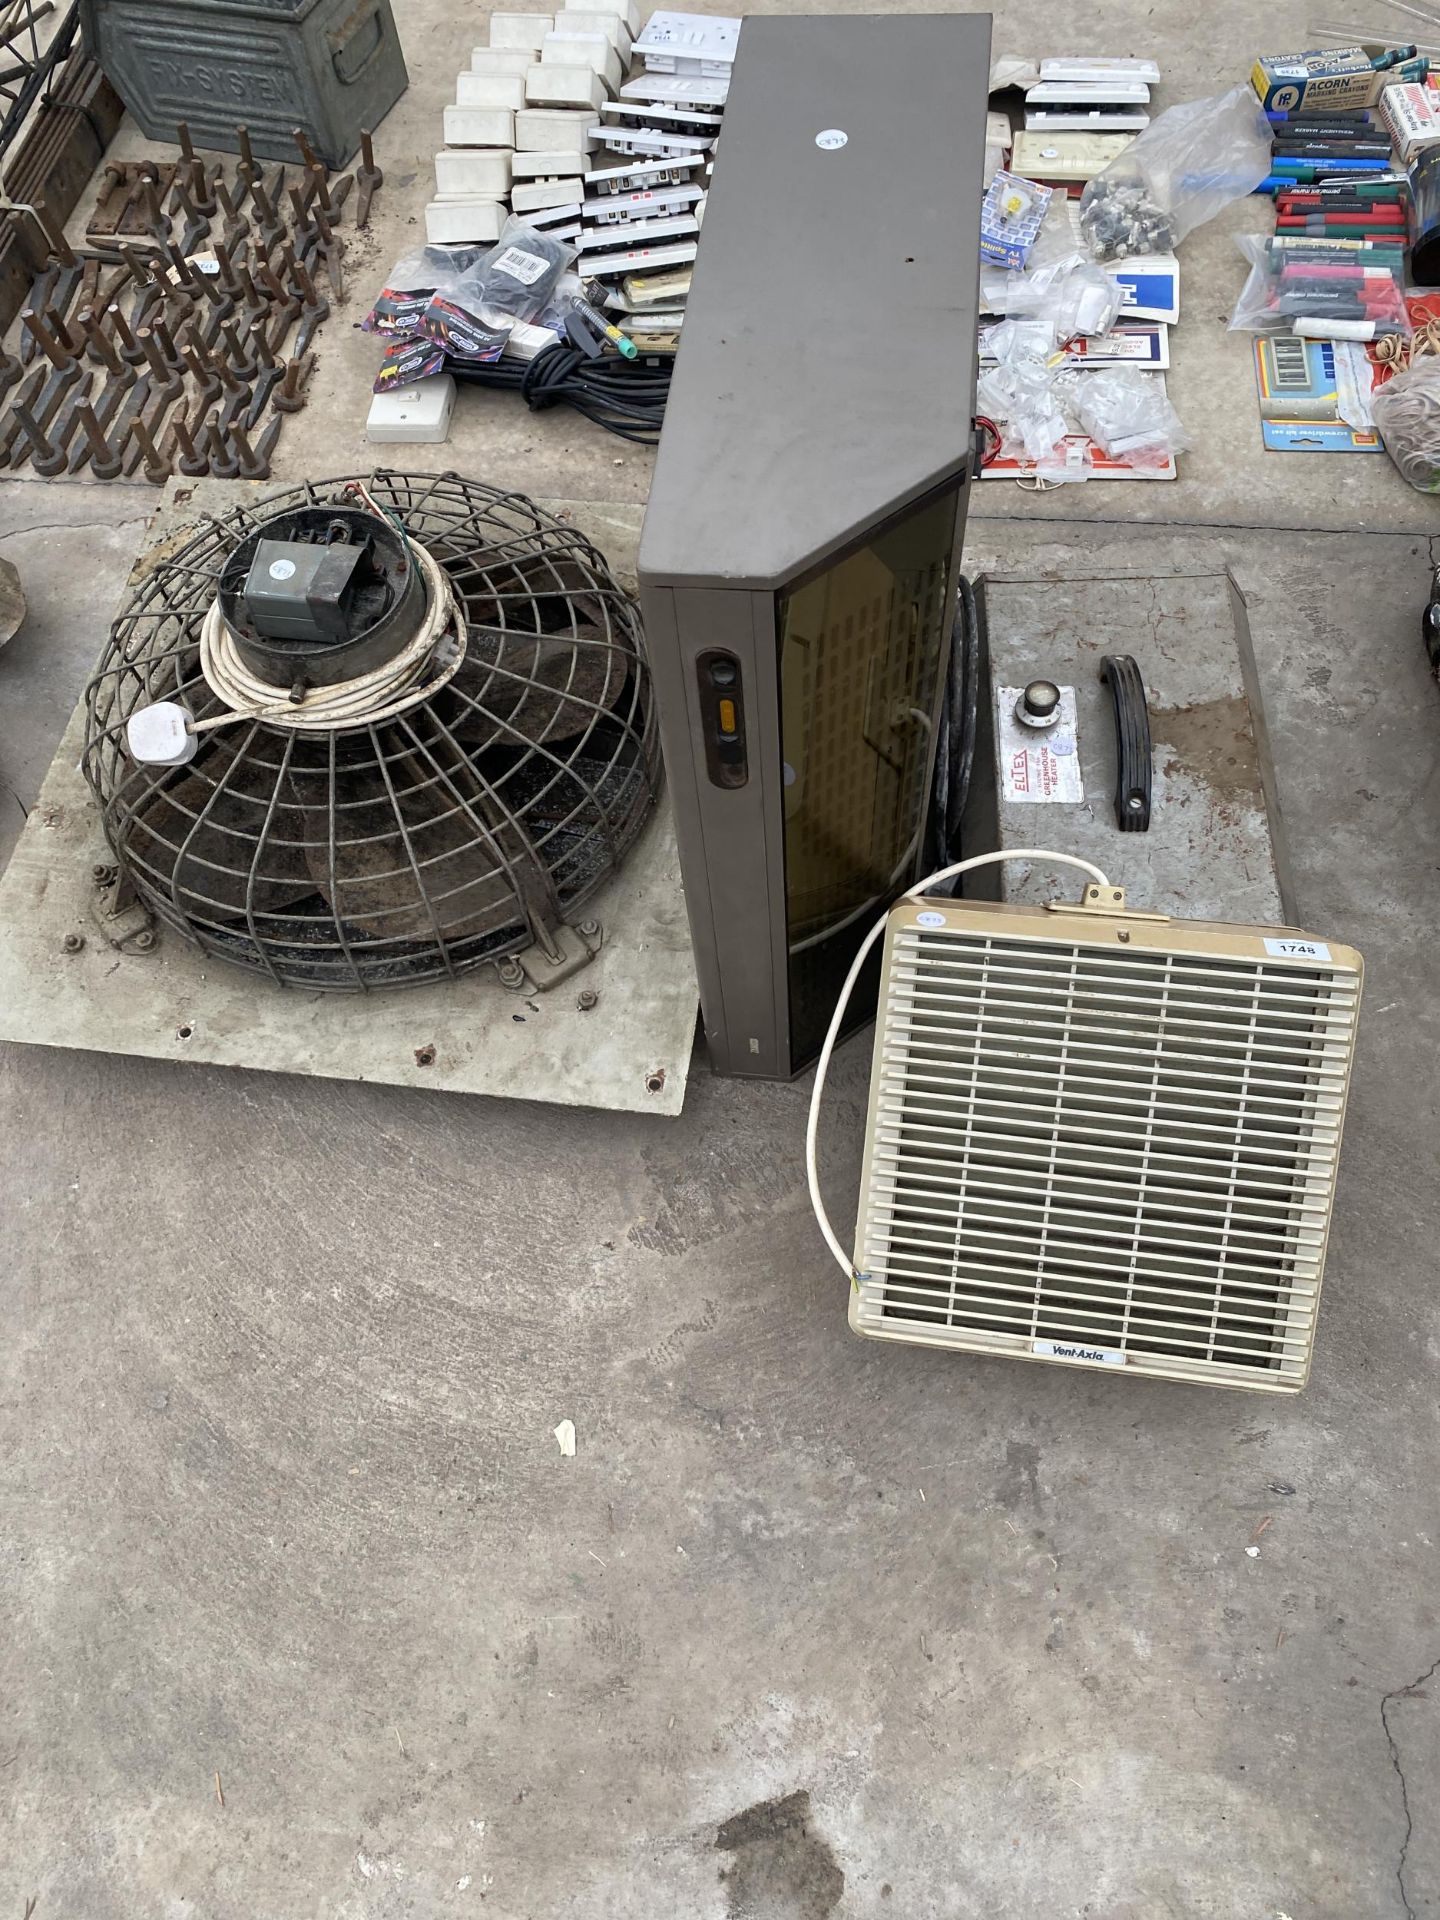 THREE VARIOUS HEATERS AND A FAN